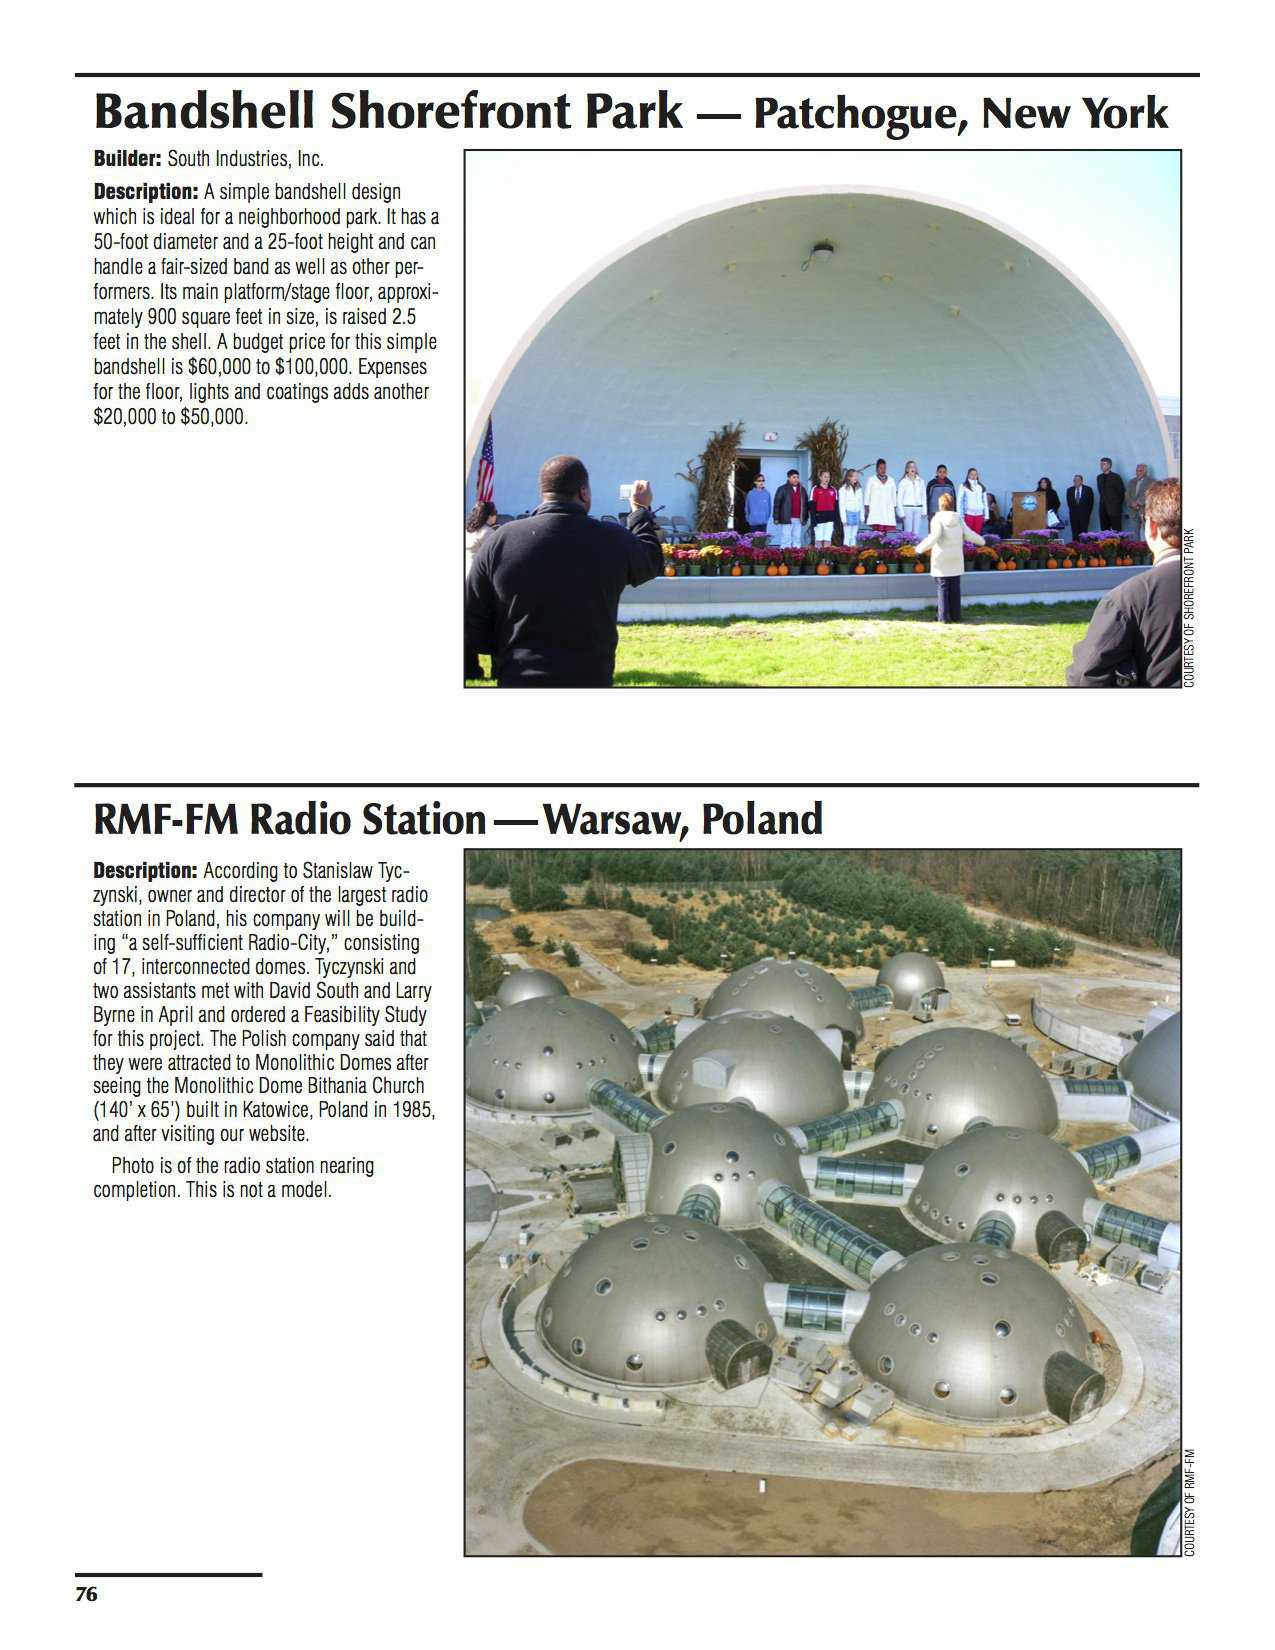 Sample pages – Bandshell Shorefront Park, Patchogue, New York & RMF-FM Radio Station, Warsaw, Poland